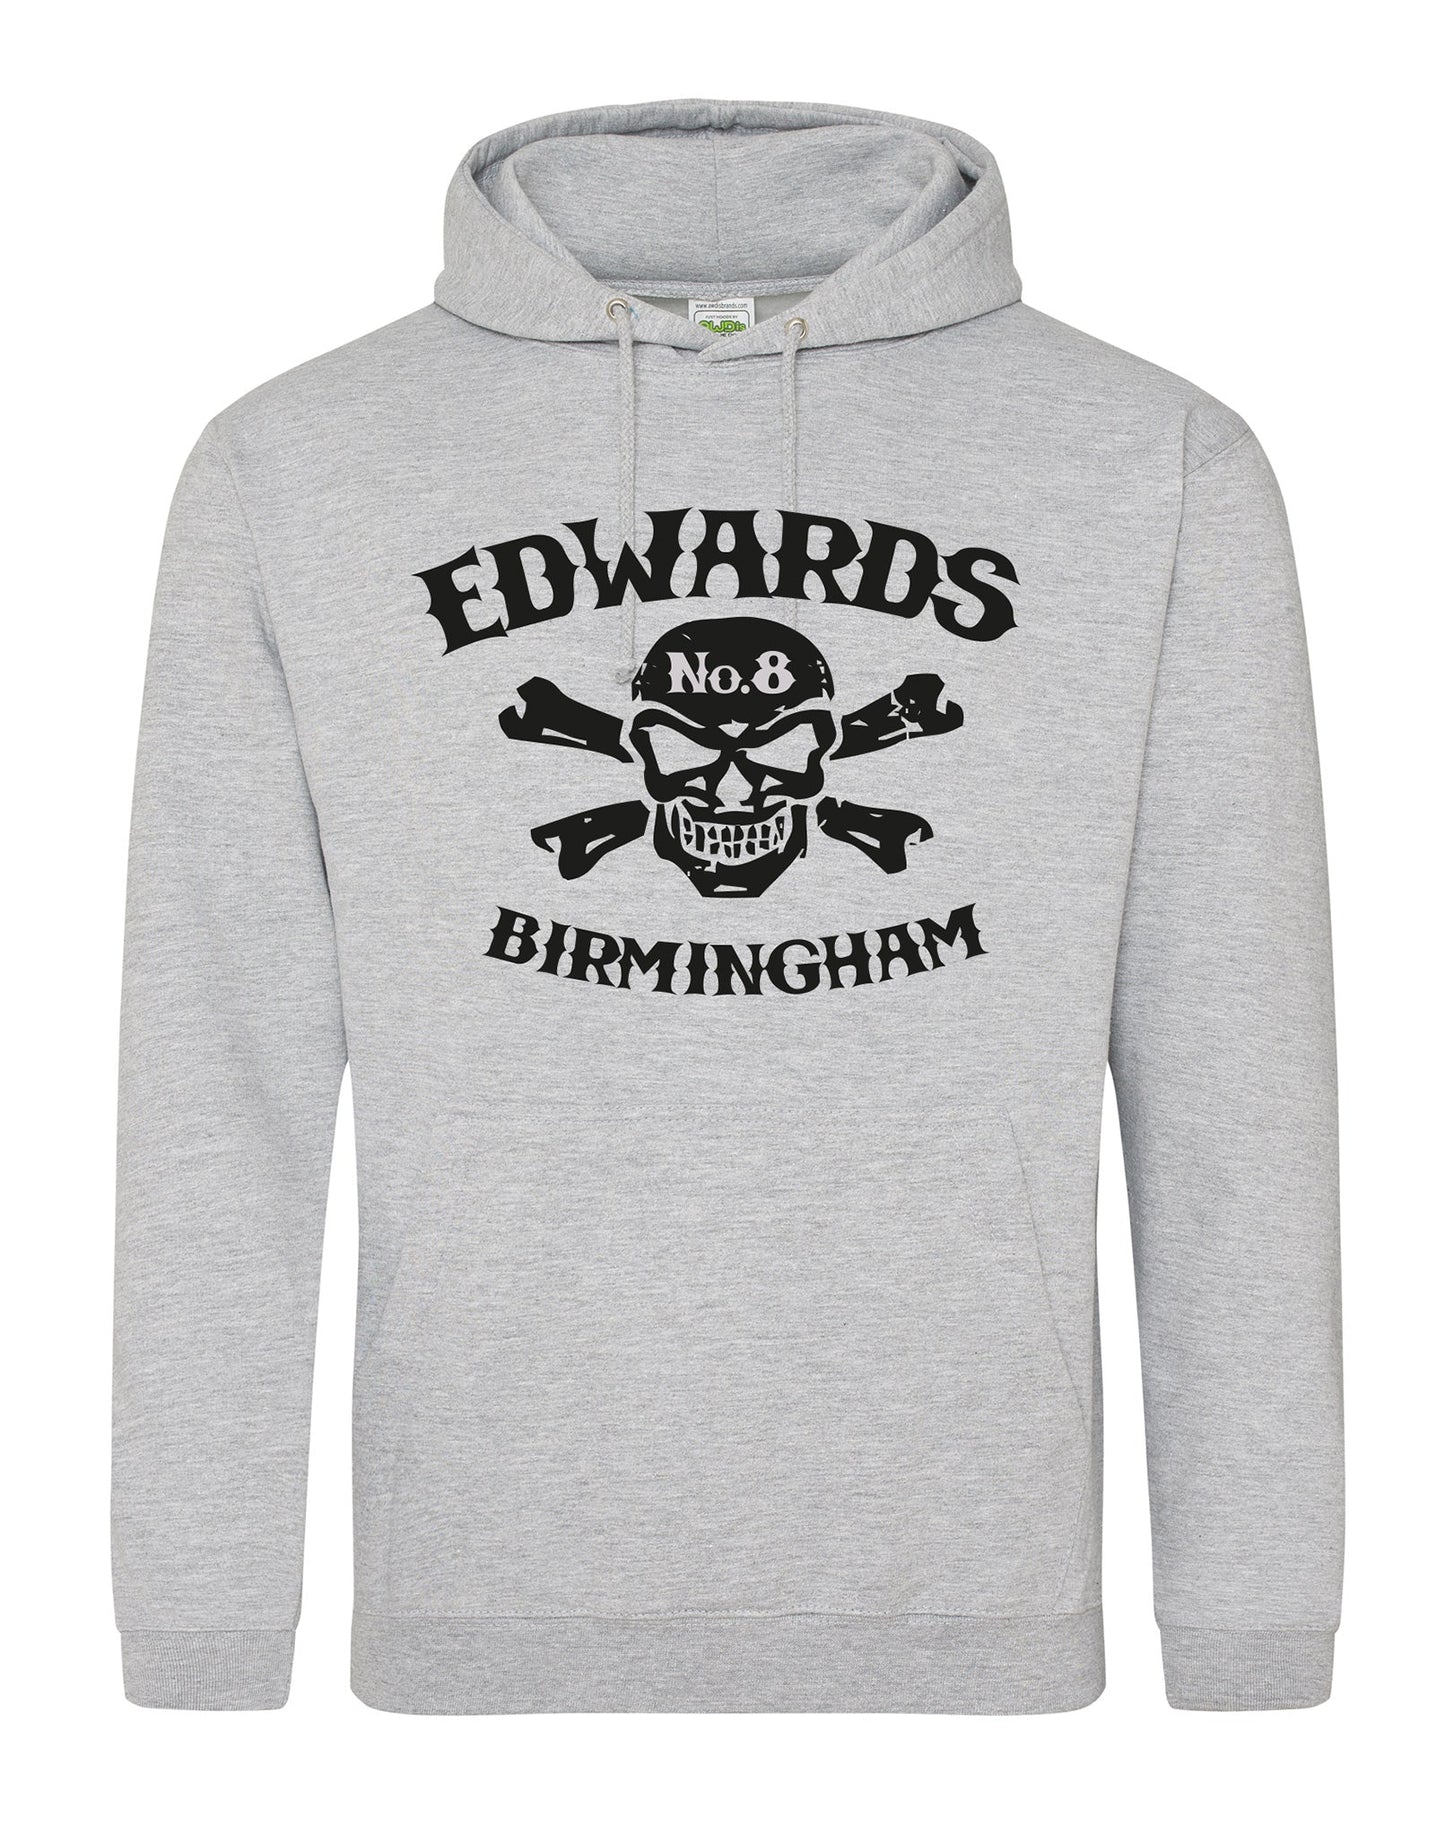 Edwards No. 8 skull/crossbones unisex hoodie - various colours - Dirty Stop Outs